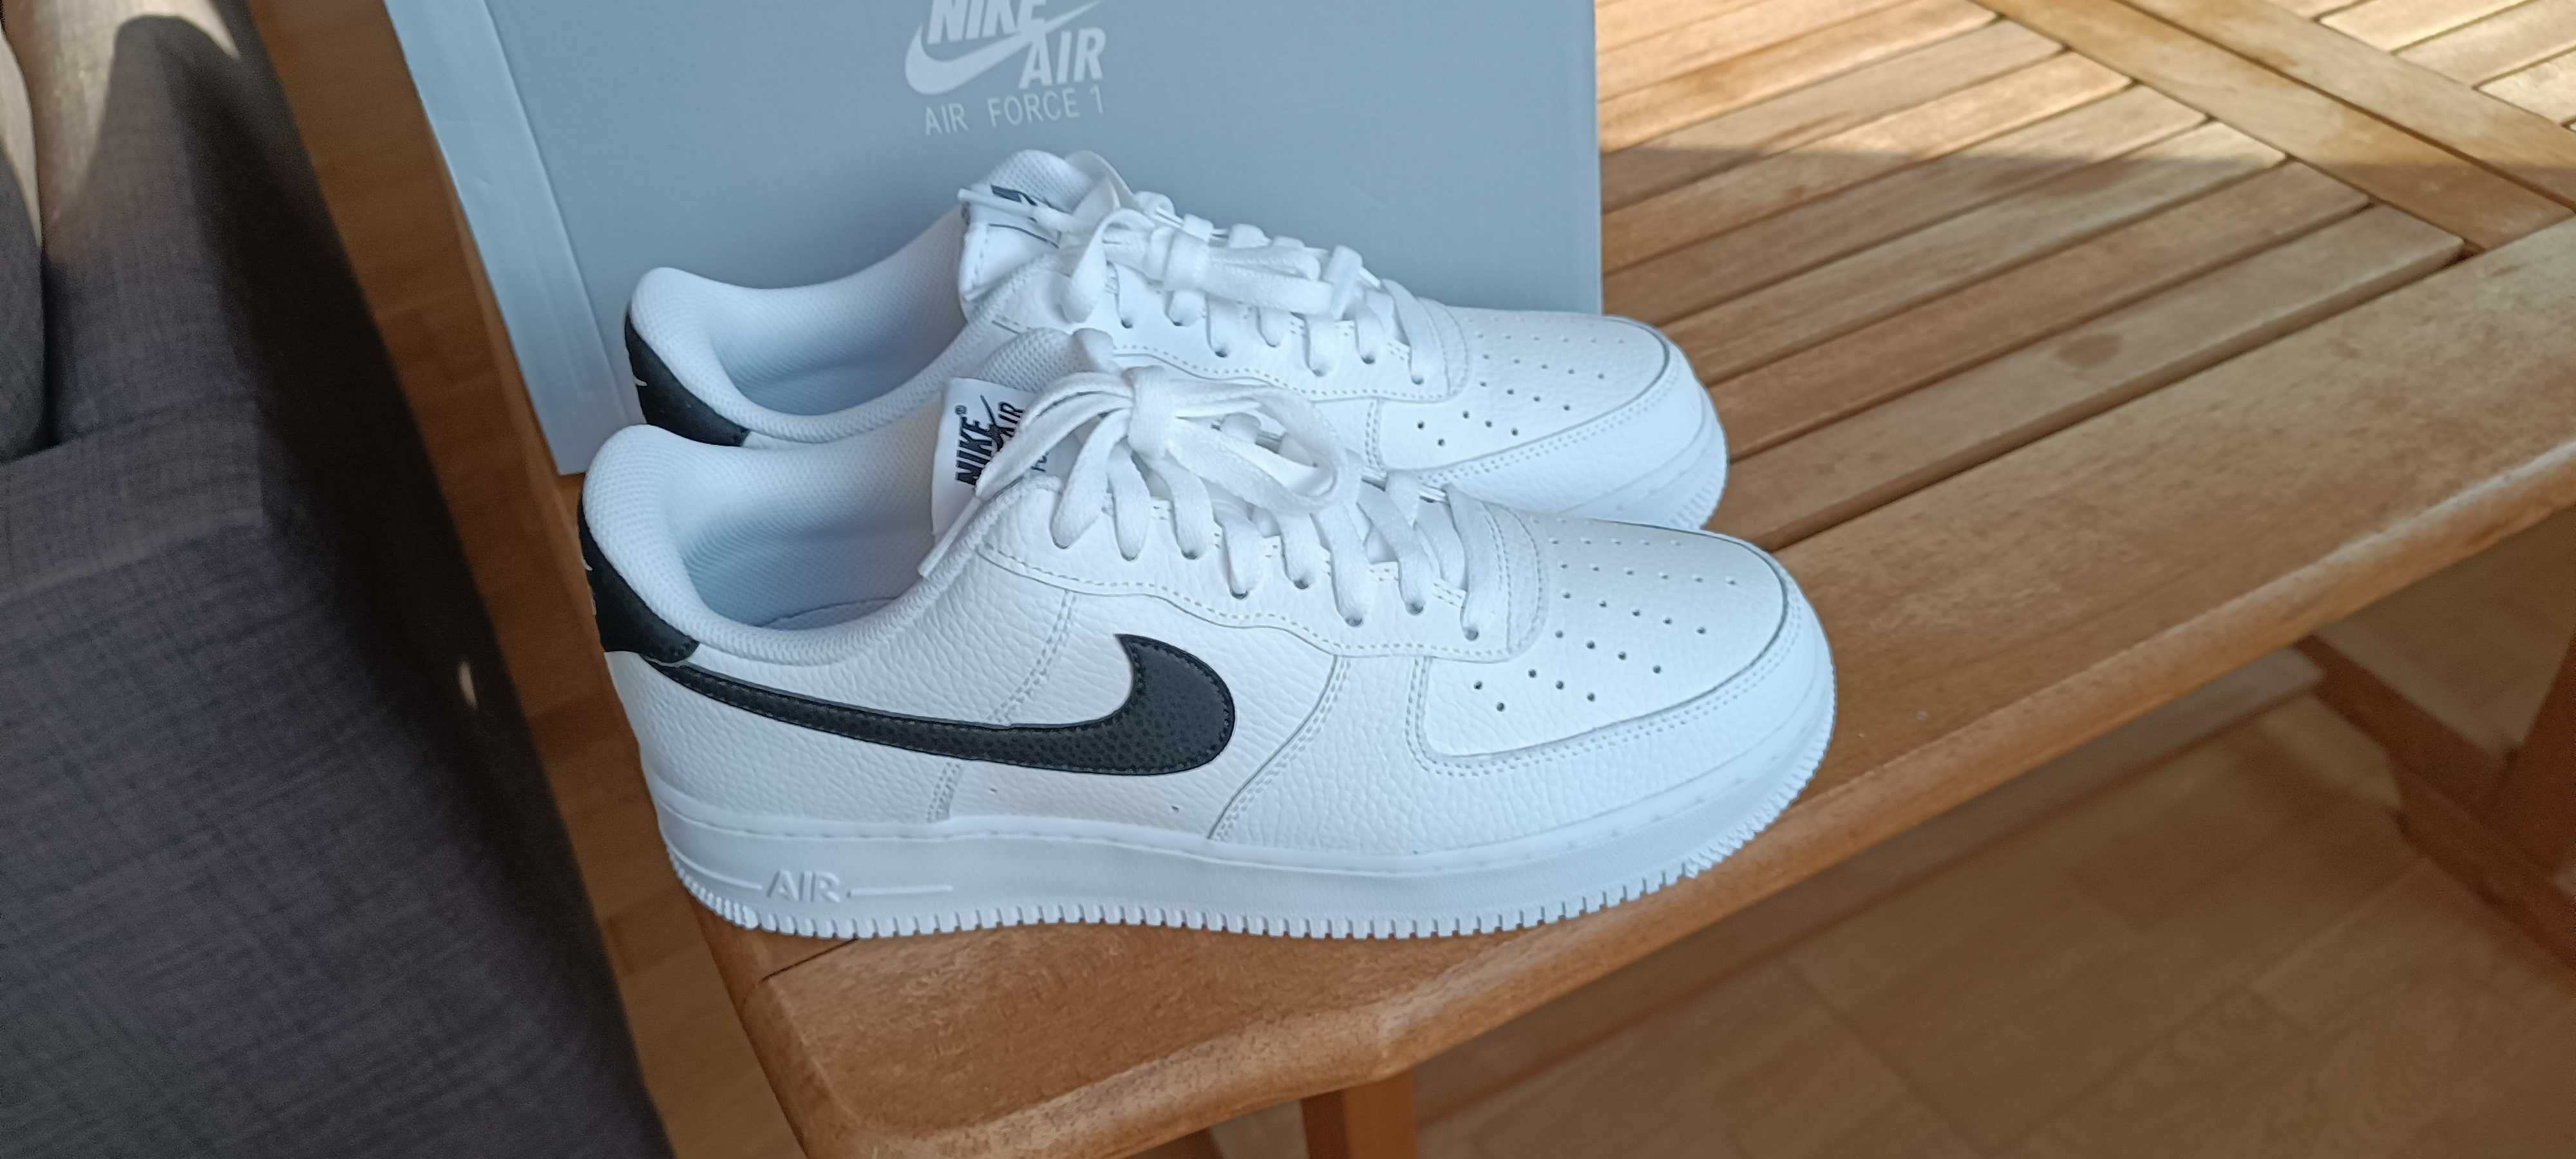 r. 43 Nike Air Force 1 Low '07 White Black Pebbled Leather CT2302,-100